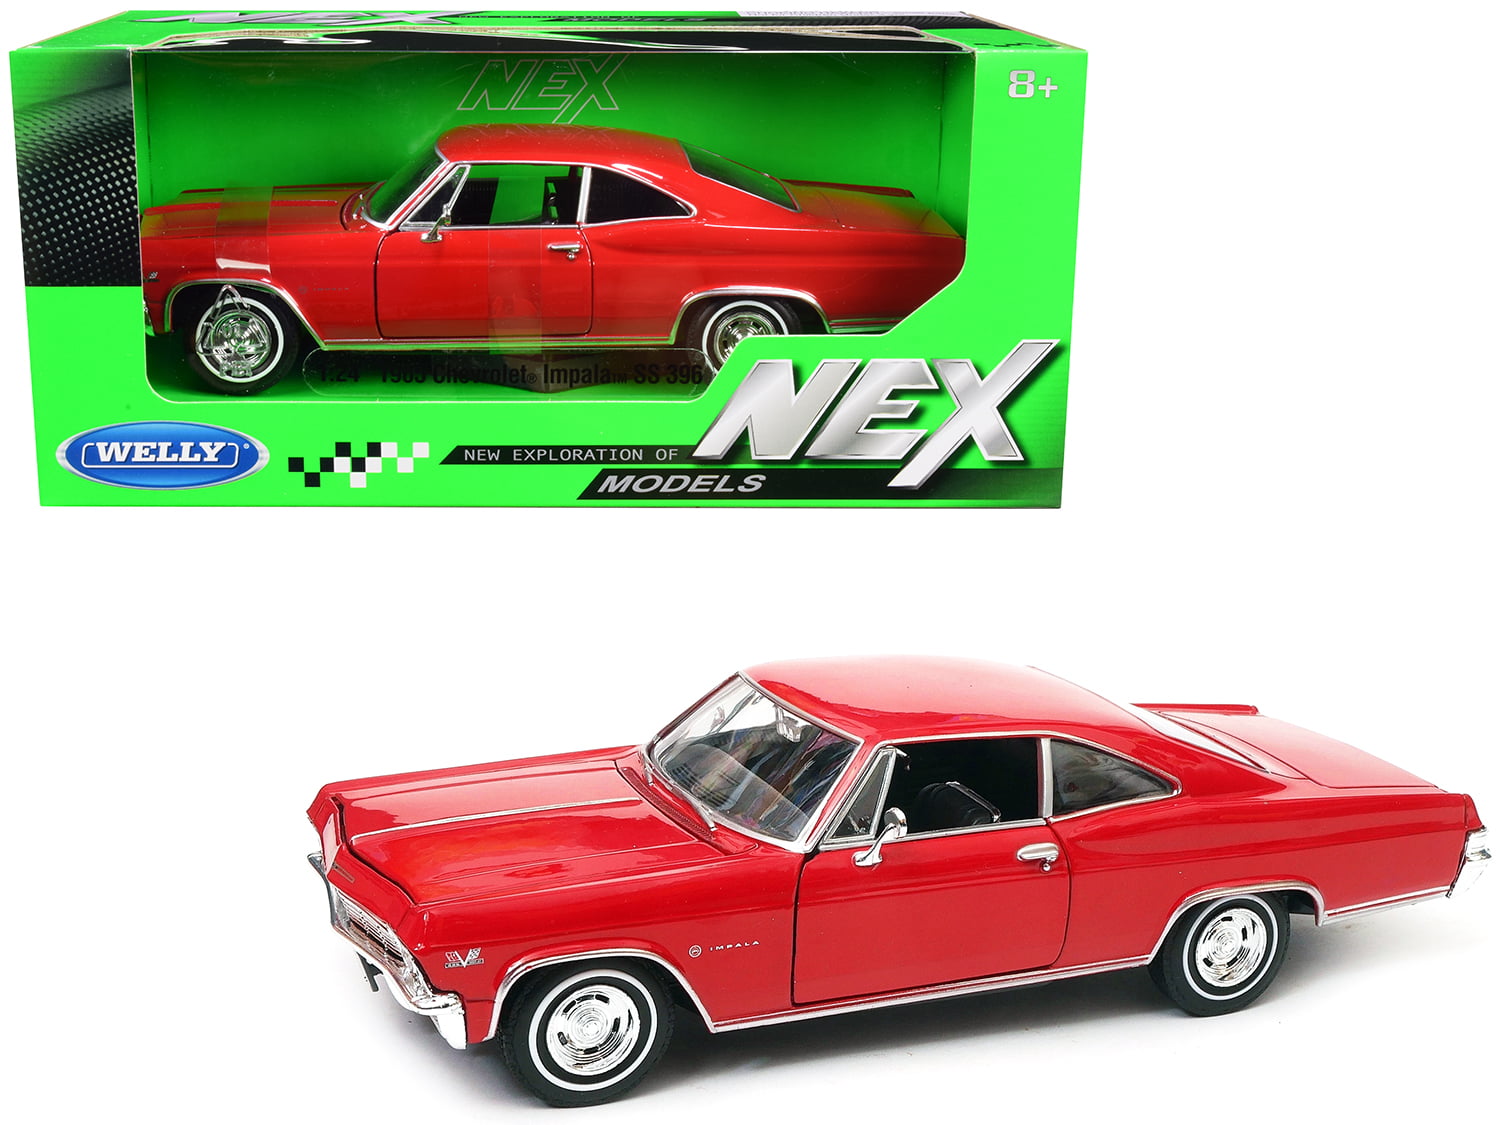 Welly 1965 Chevrolet Impala SS 396 Hardtop 1:24 Display Model Toy Car 22417 